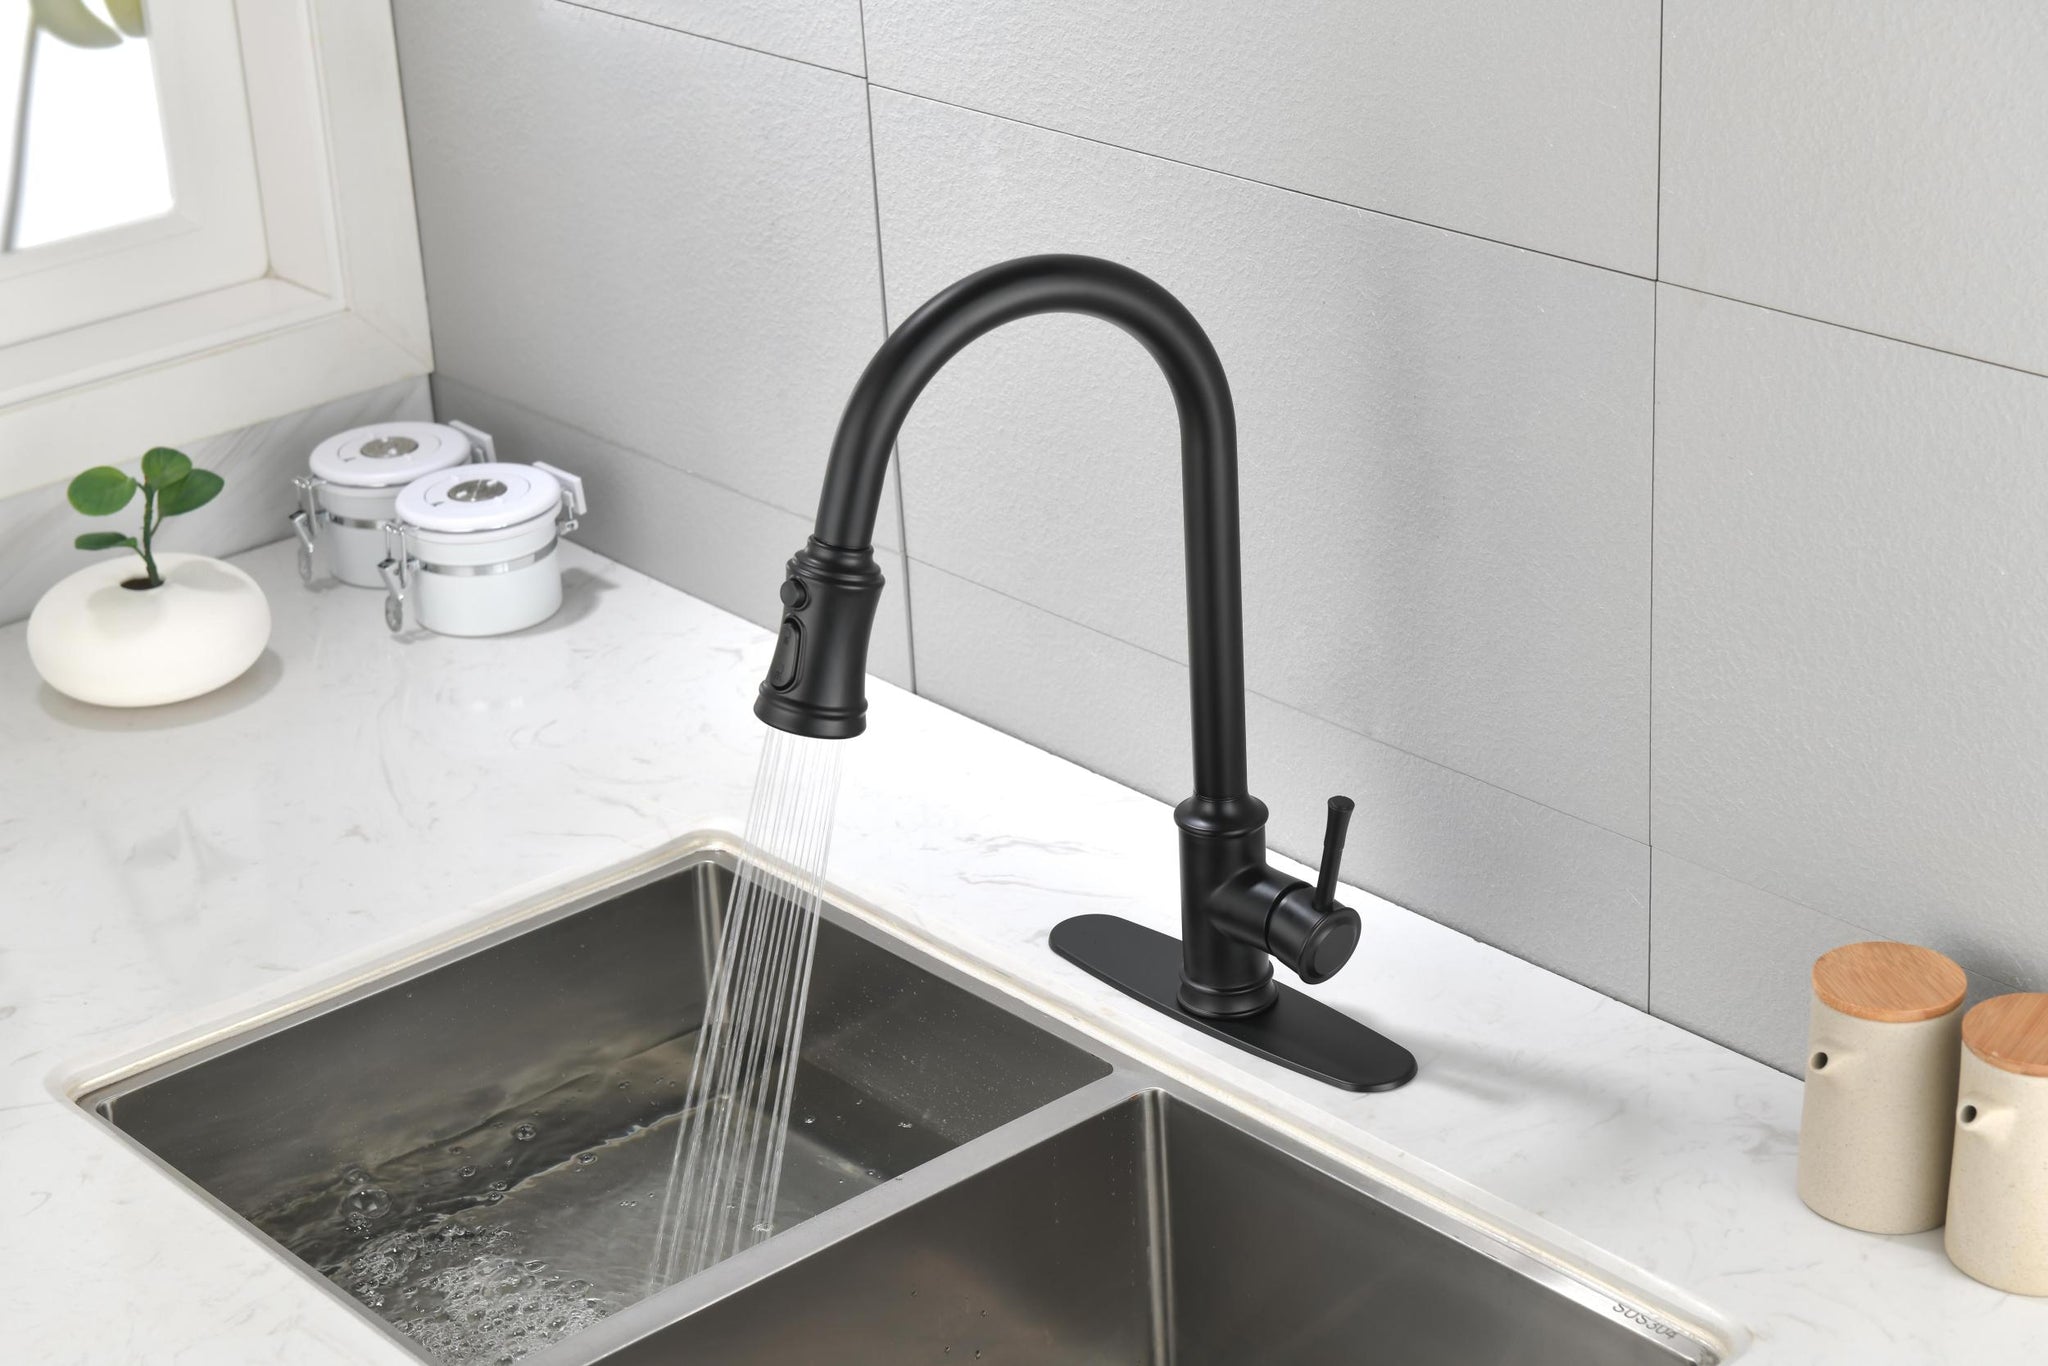 Touch Kitchen Faucet with Pull Down Sprayer matte black-stainless steel